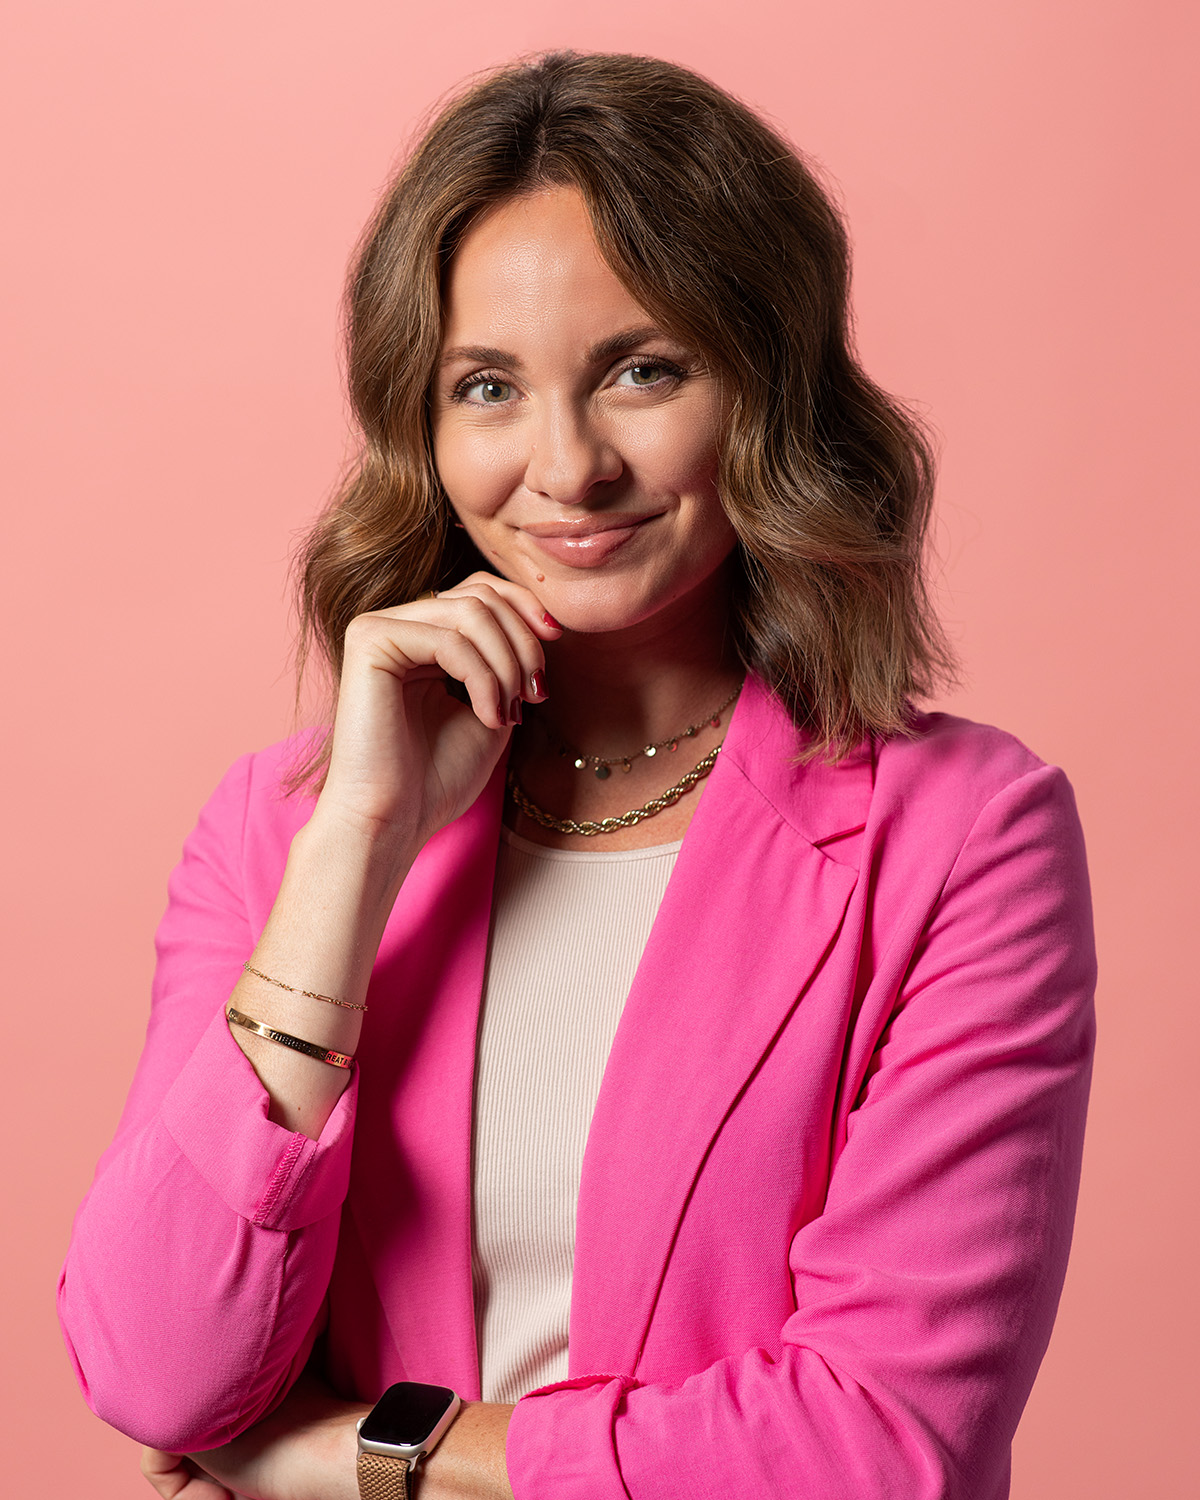 Ashley Miller, Asher Account Executive, with pink blazer and resting hand against chin